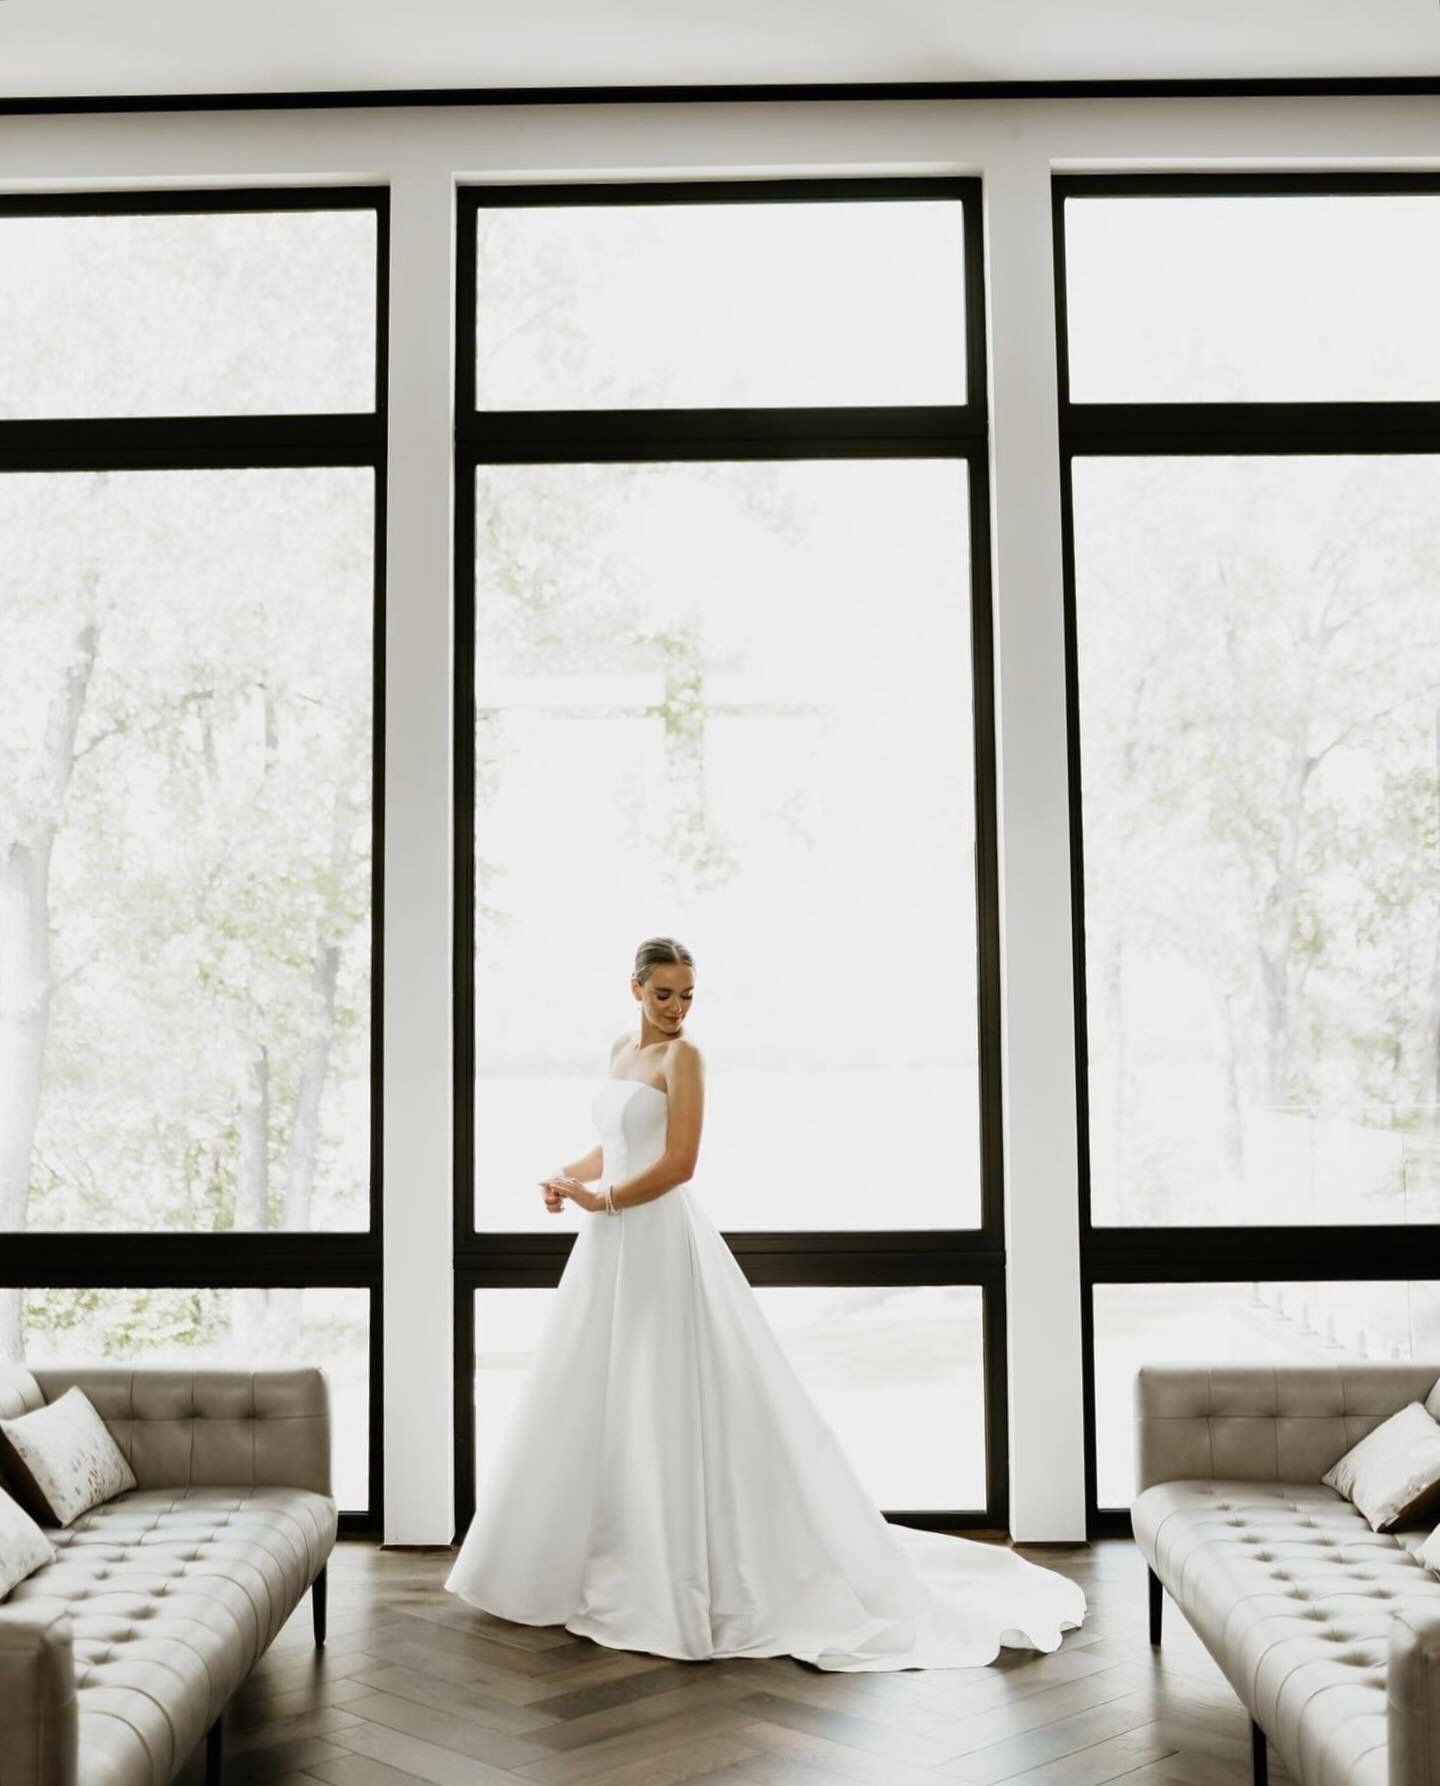 We will forever swoon over Sarah in her dress from Essense of Australia.

Photos: @cynthiabettencourtphotography 
Hair: blush and blonde @204red 
Makeup artist: @theaesthetic.makeup 

#blissbride #blissbridal #winnipegweddings #weddingdressinspo #wed